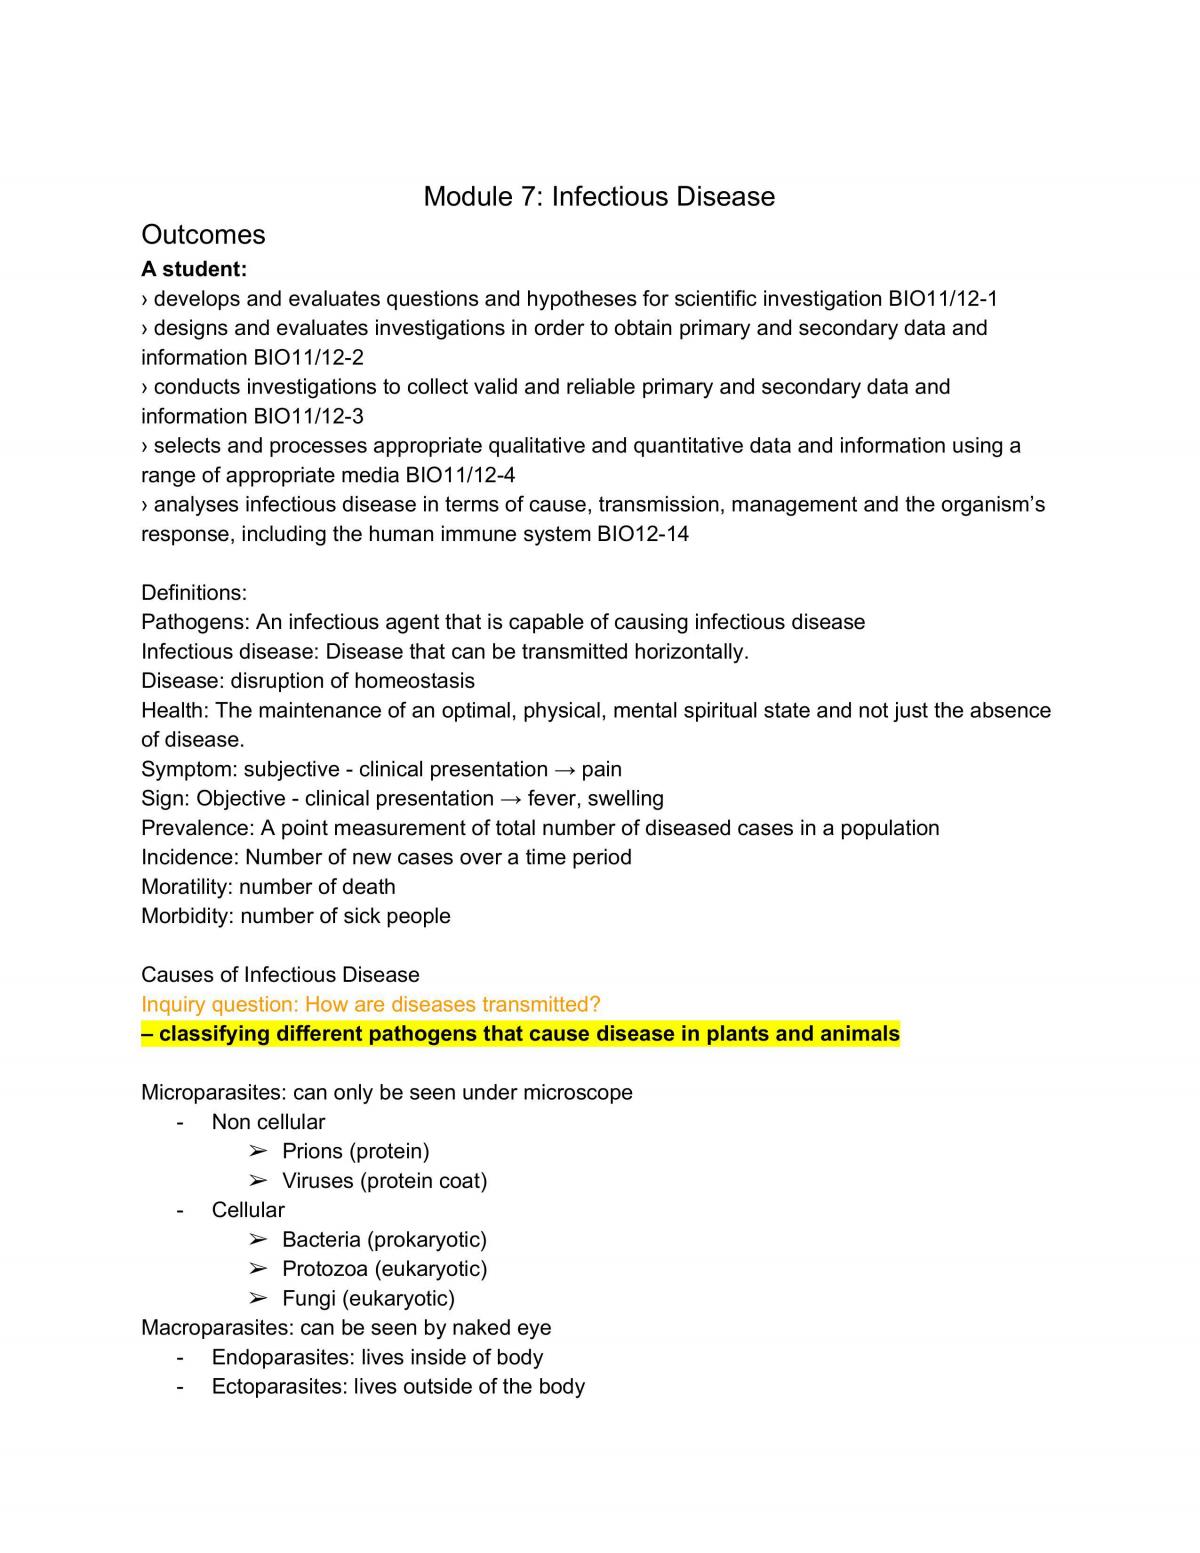 Module 7 - Infectious Disease Notes - Page 1